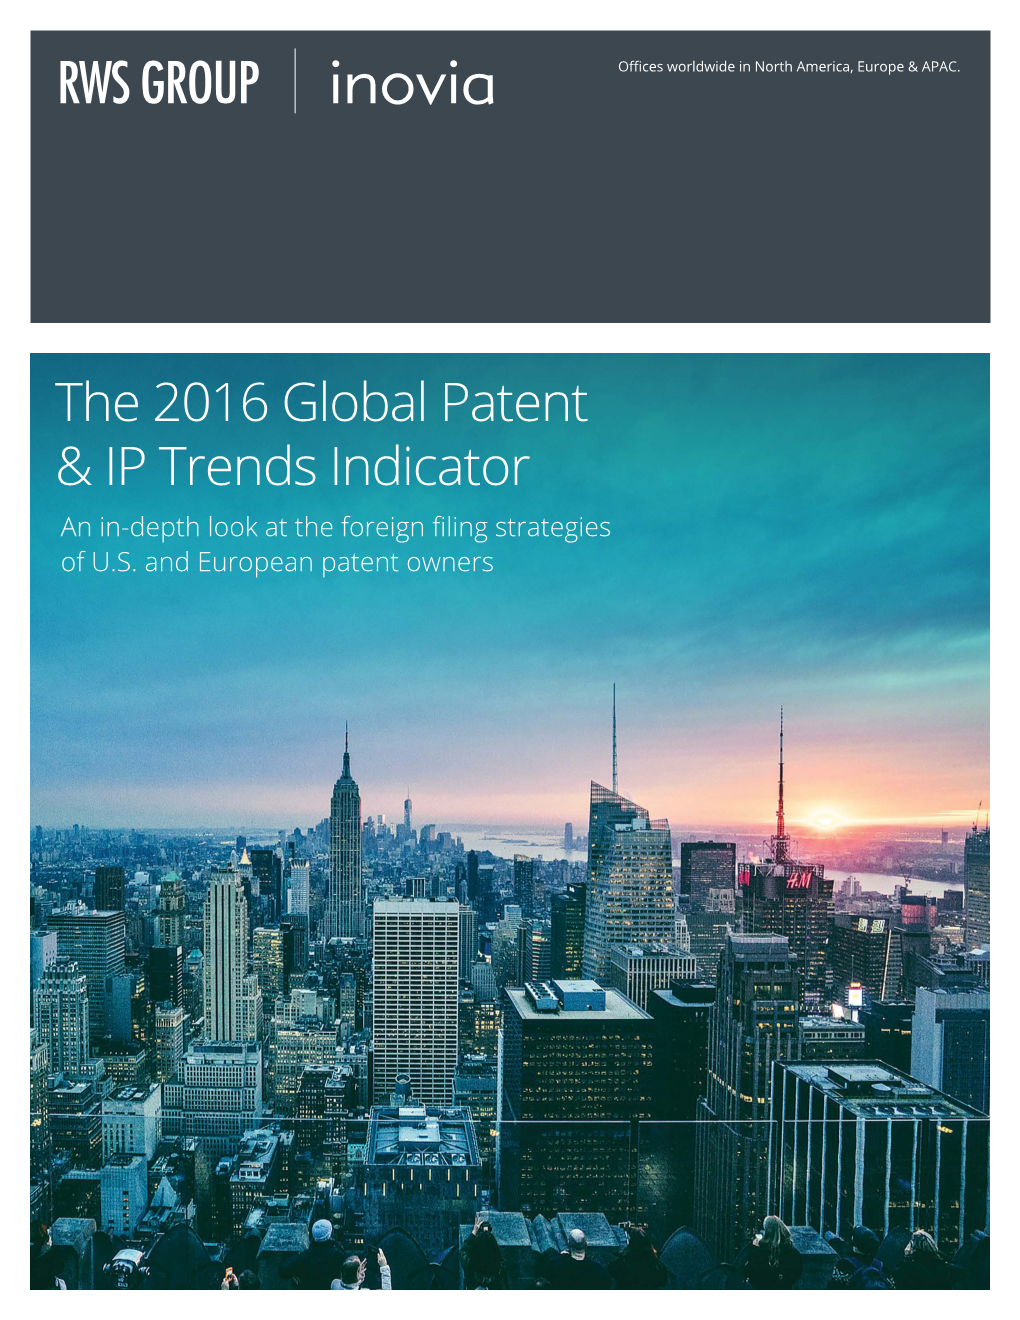 The 2016 Global Patent & IP Trends Indicator